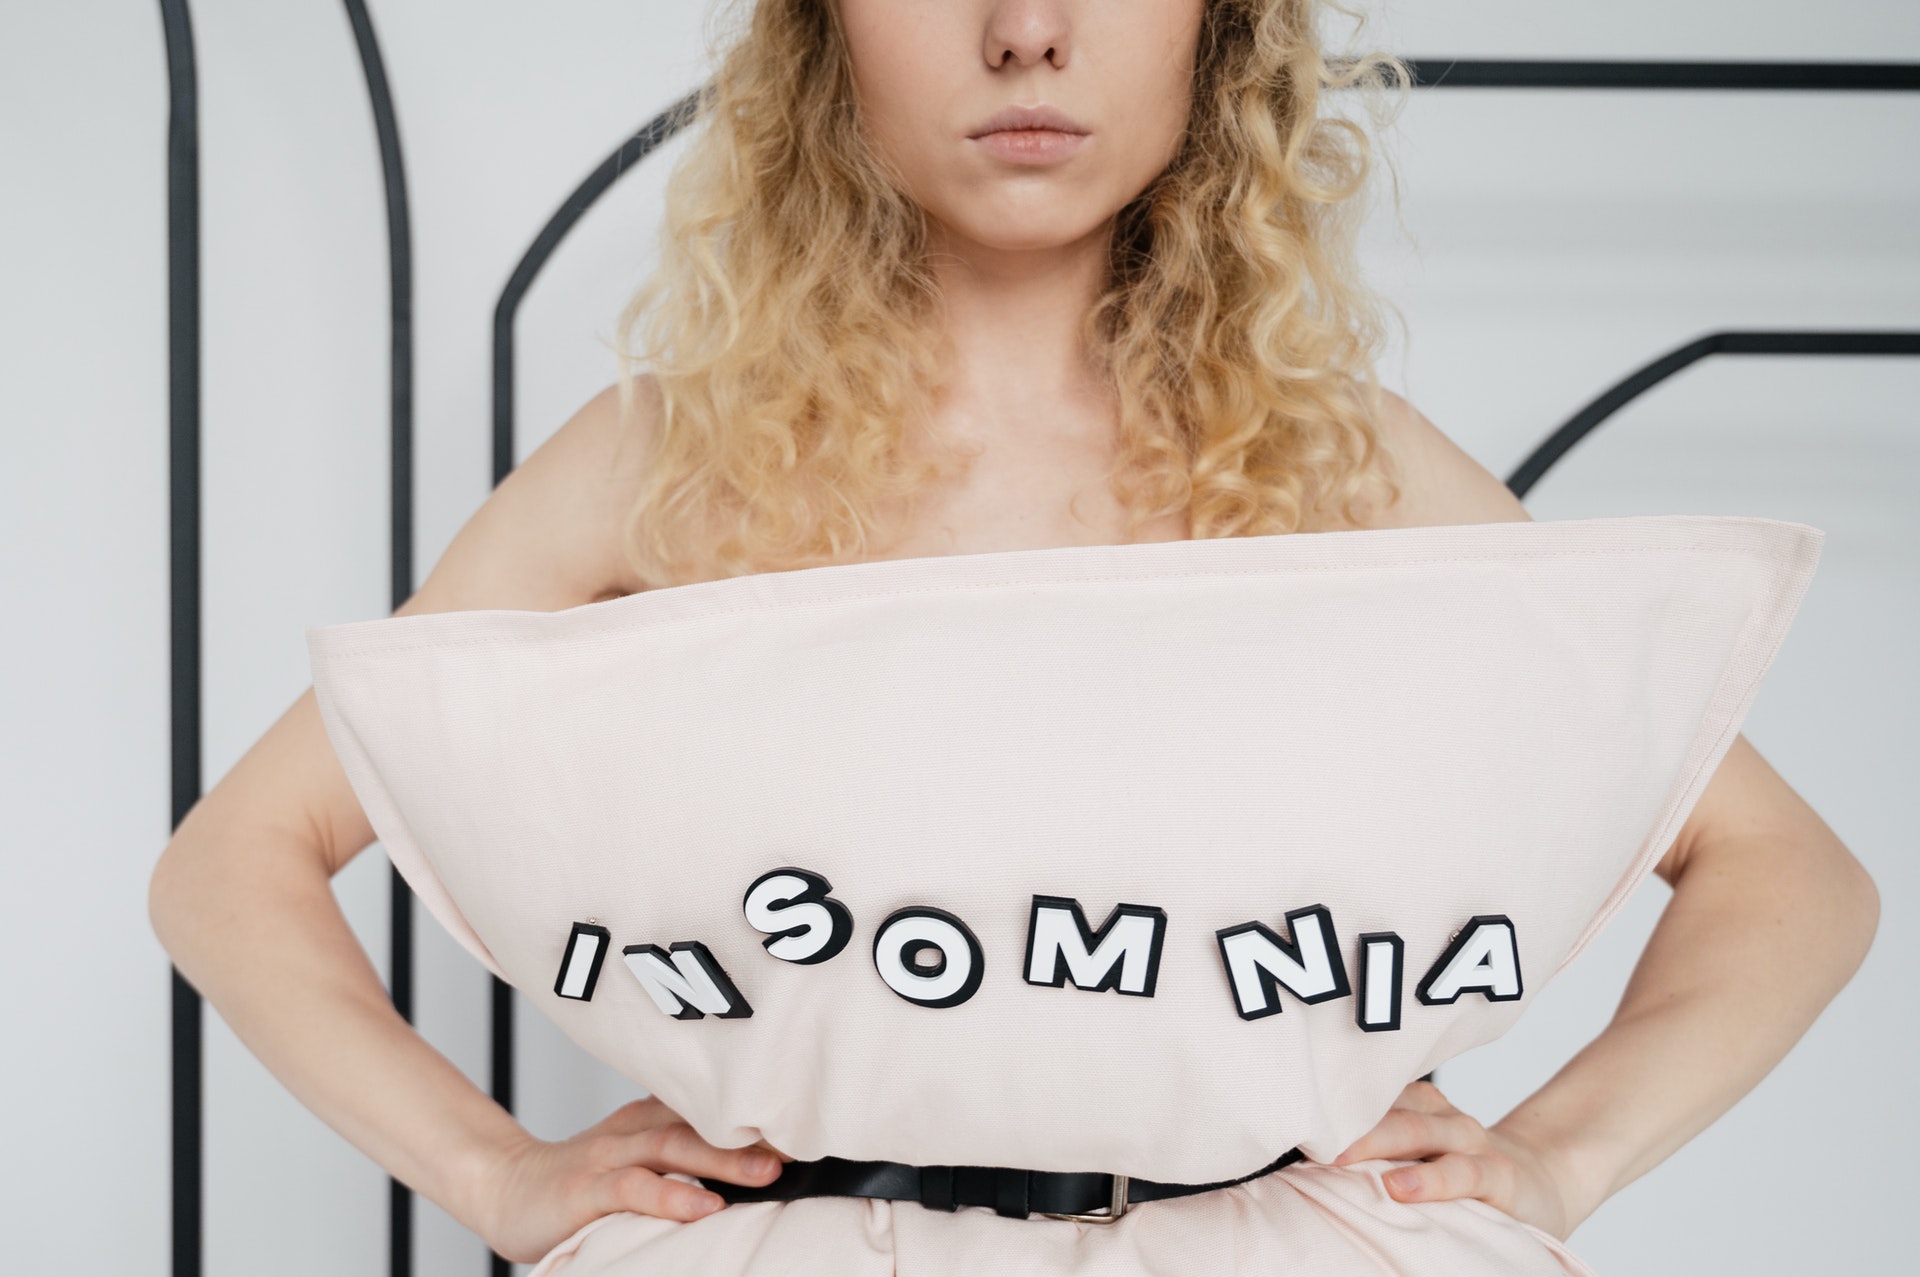 Woman with a sleep disorder in bed with a pillow that says insomnia